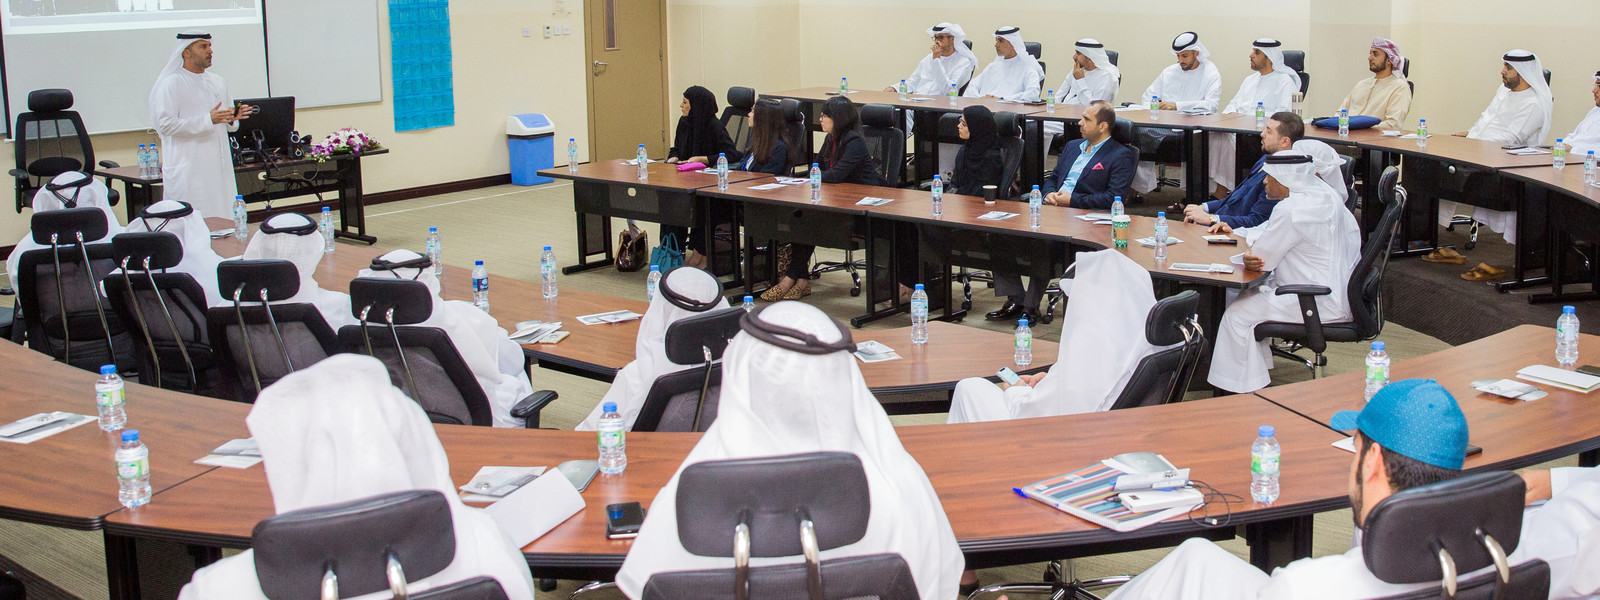 enec-ceo-lecture-at-adu-2-5d3583ff23802.jpg (Gallery Image)